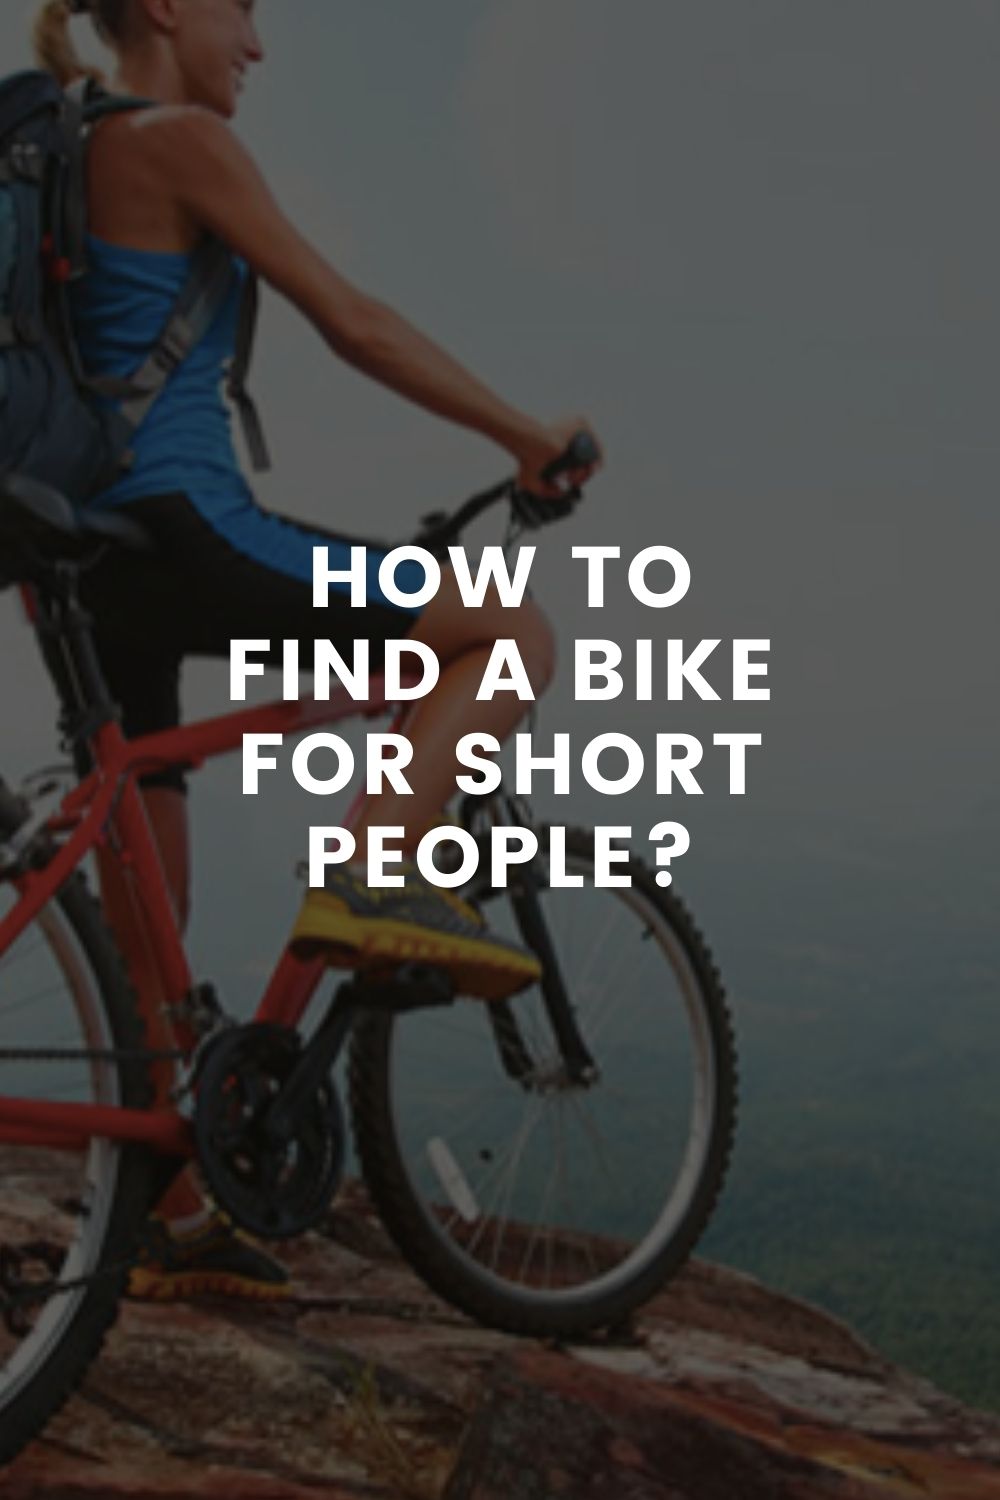 How to Find a Bike for Short People?